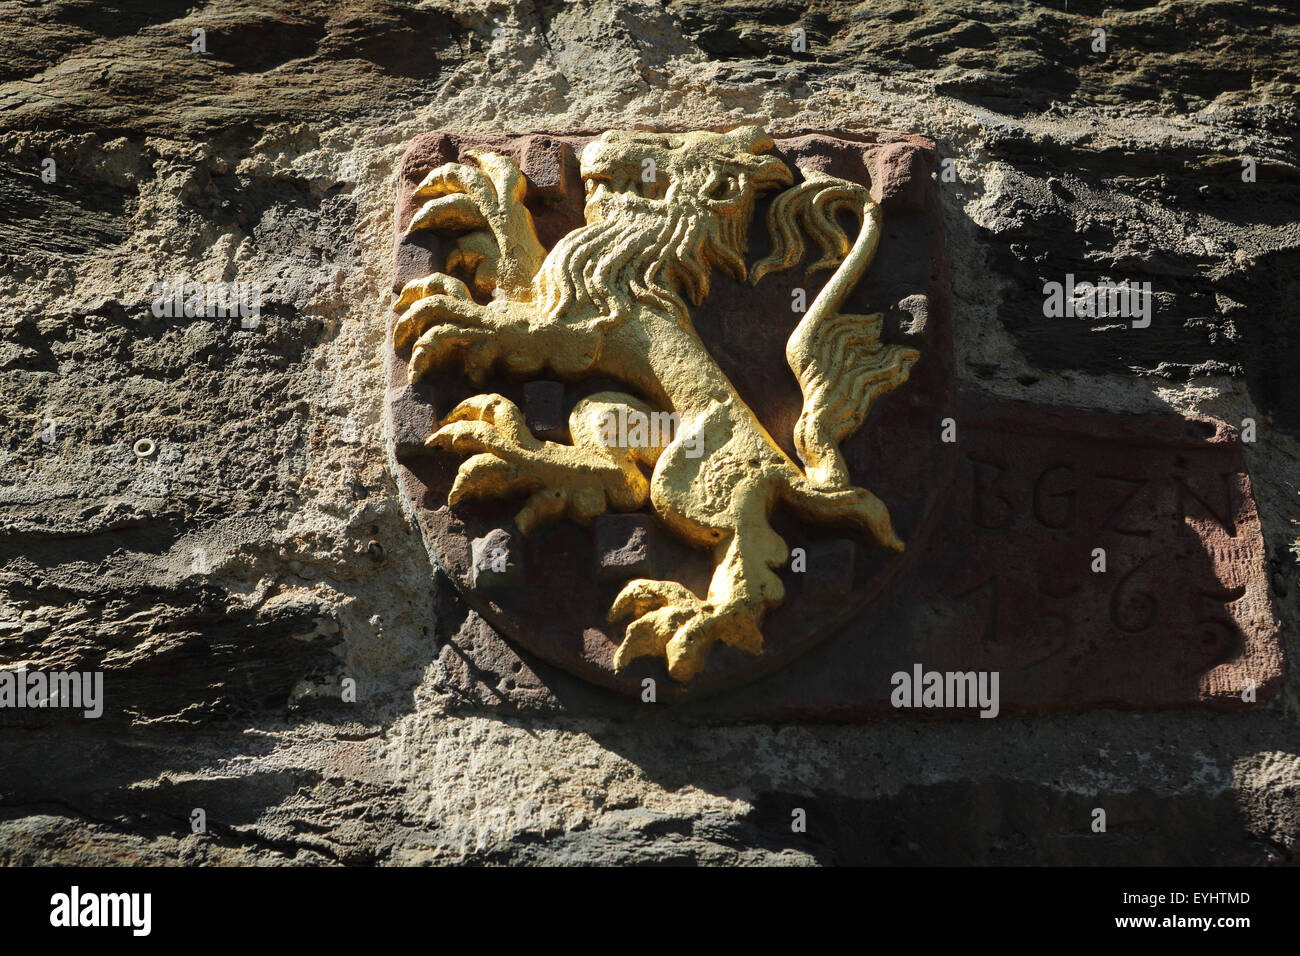 A House of Nassau's lion rampant crest on a wall in Idstein, Germany. Stock Photo